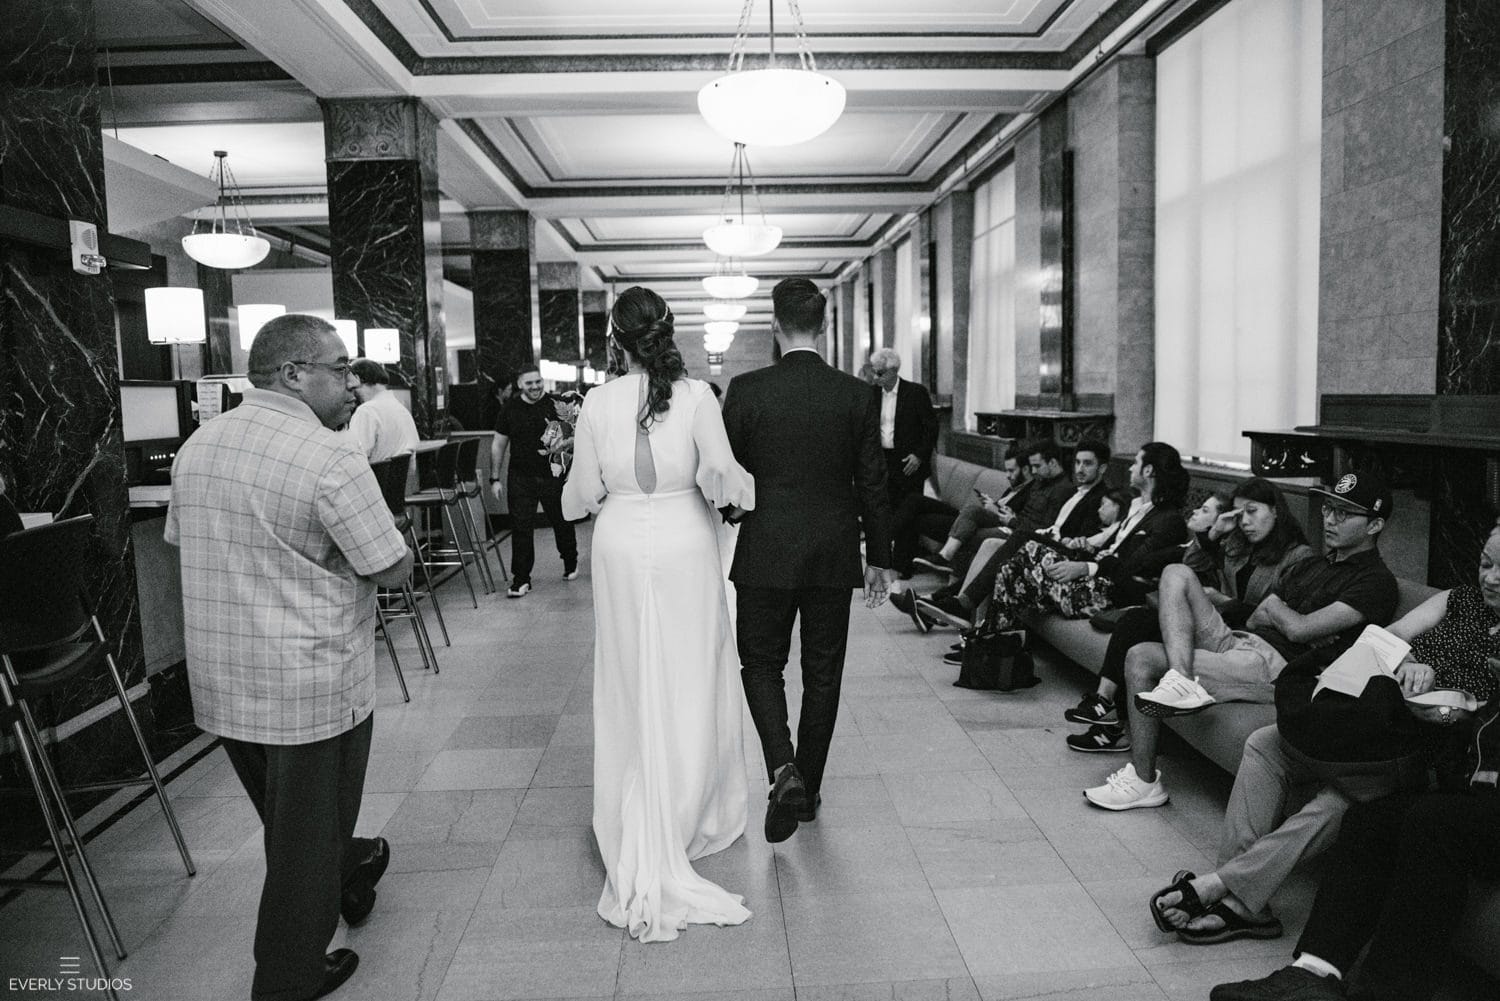 NYC City Hall elopement. Photos by NYC elopement photographer Everly Studios, www.everlystudios.com